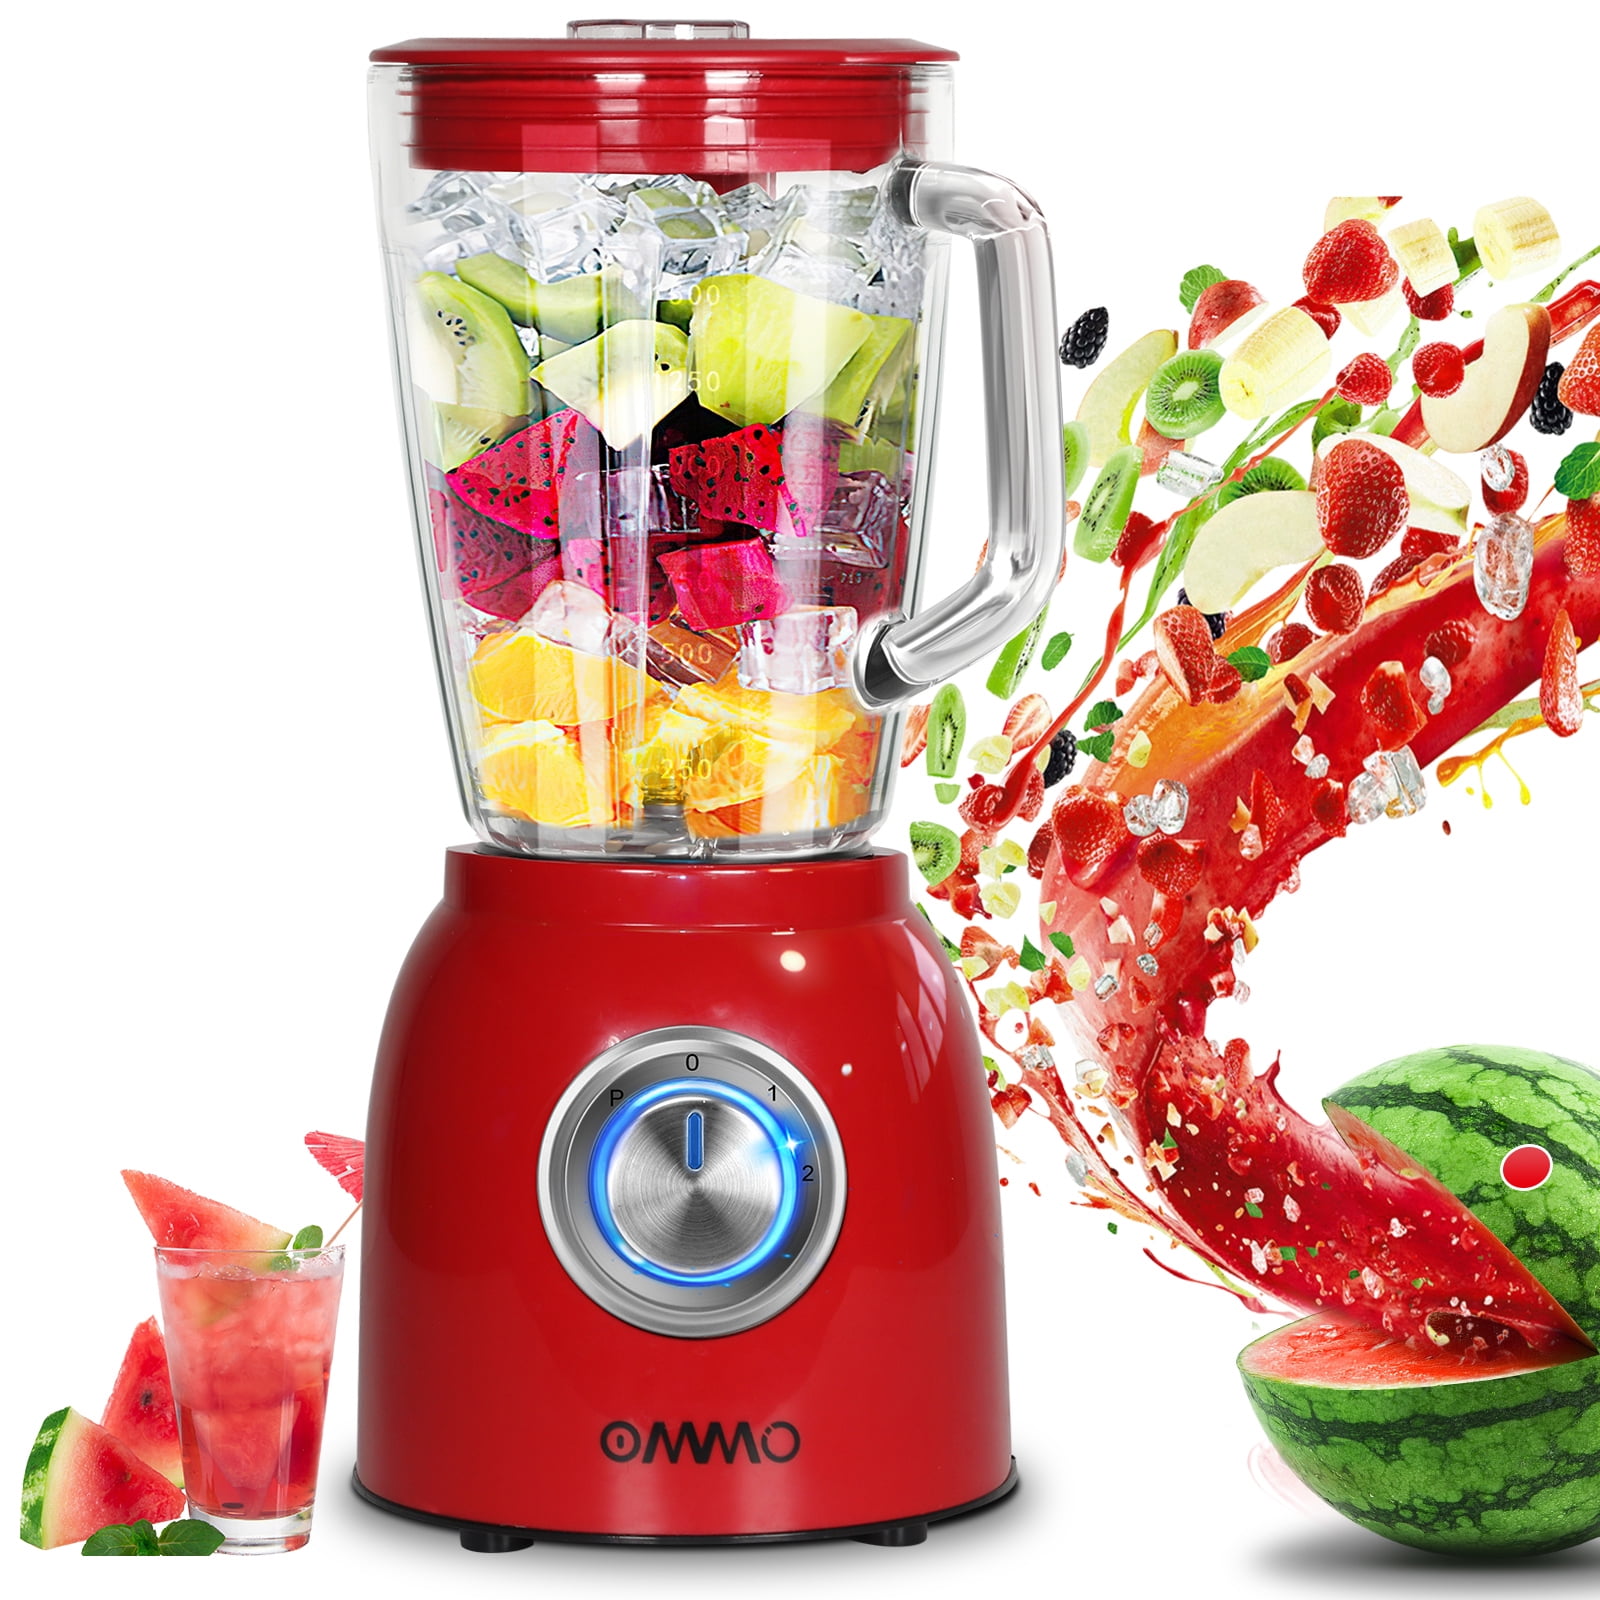 OMMO Countertop Blender, 53oz/1.5L Glass Jar 2 Speeds Professional Blender for Smoothies Frozen Drinks Ice Crush, pic picture